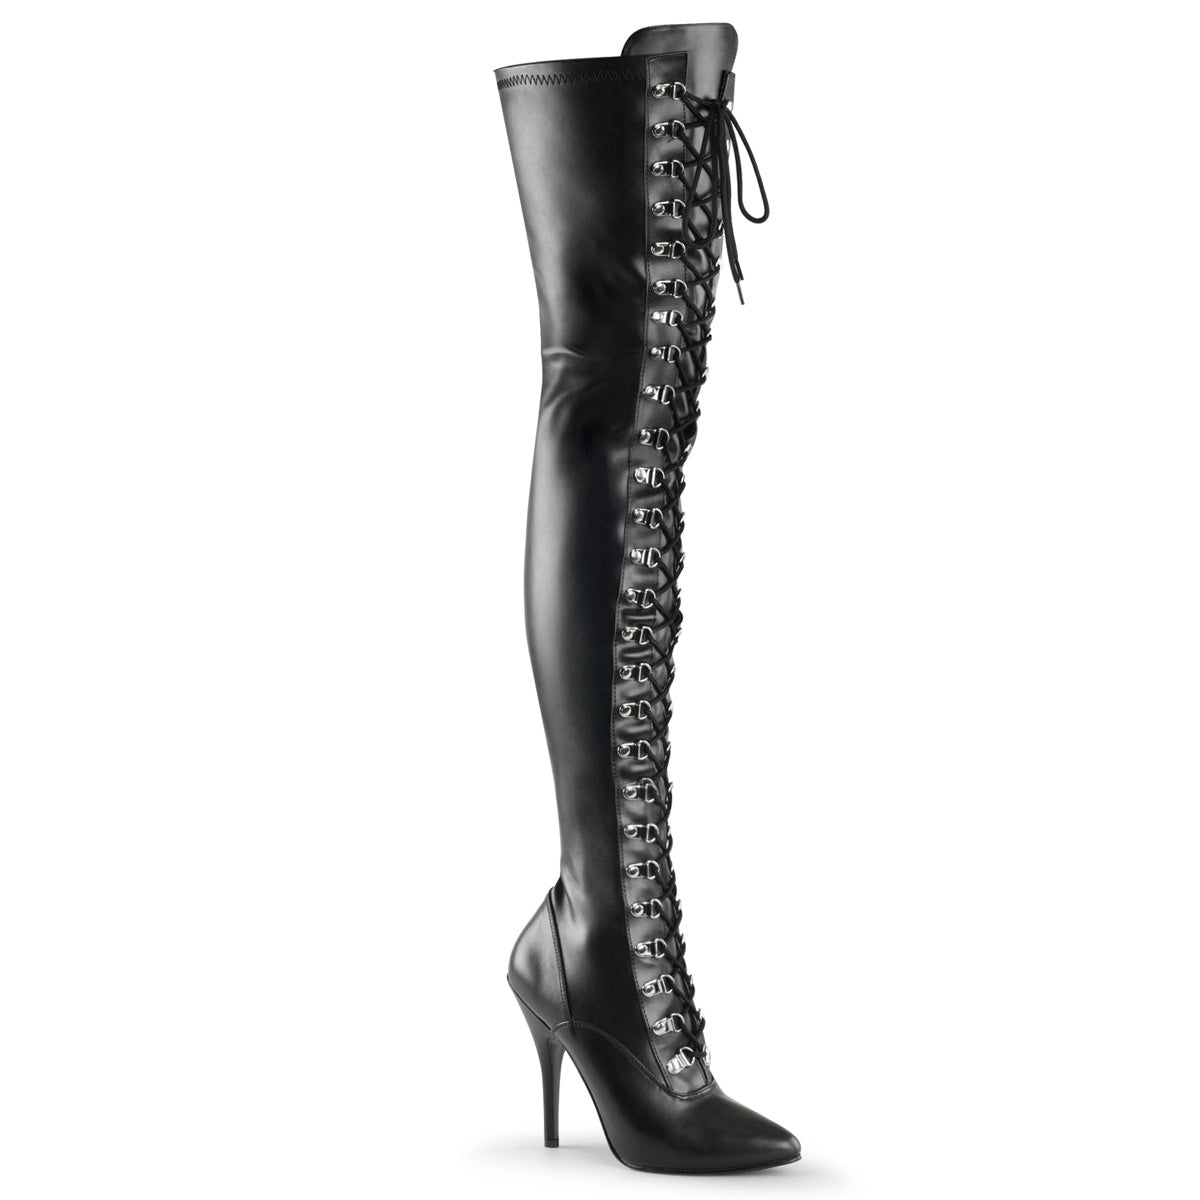 SEDUCE-3024 Pleaser Thigh Boots 5" Heel Black Fetish Shoes-Pleaser- Sexy Shoes